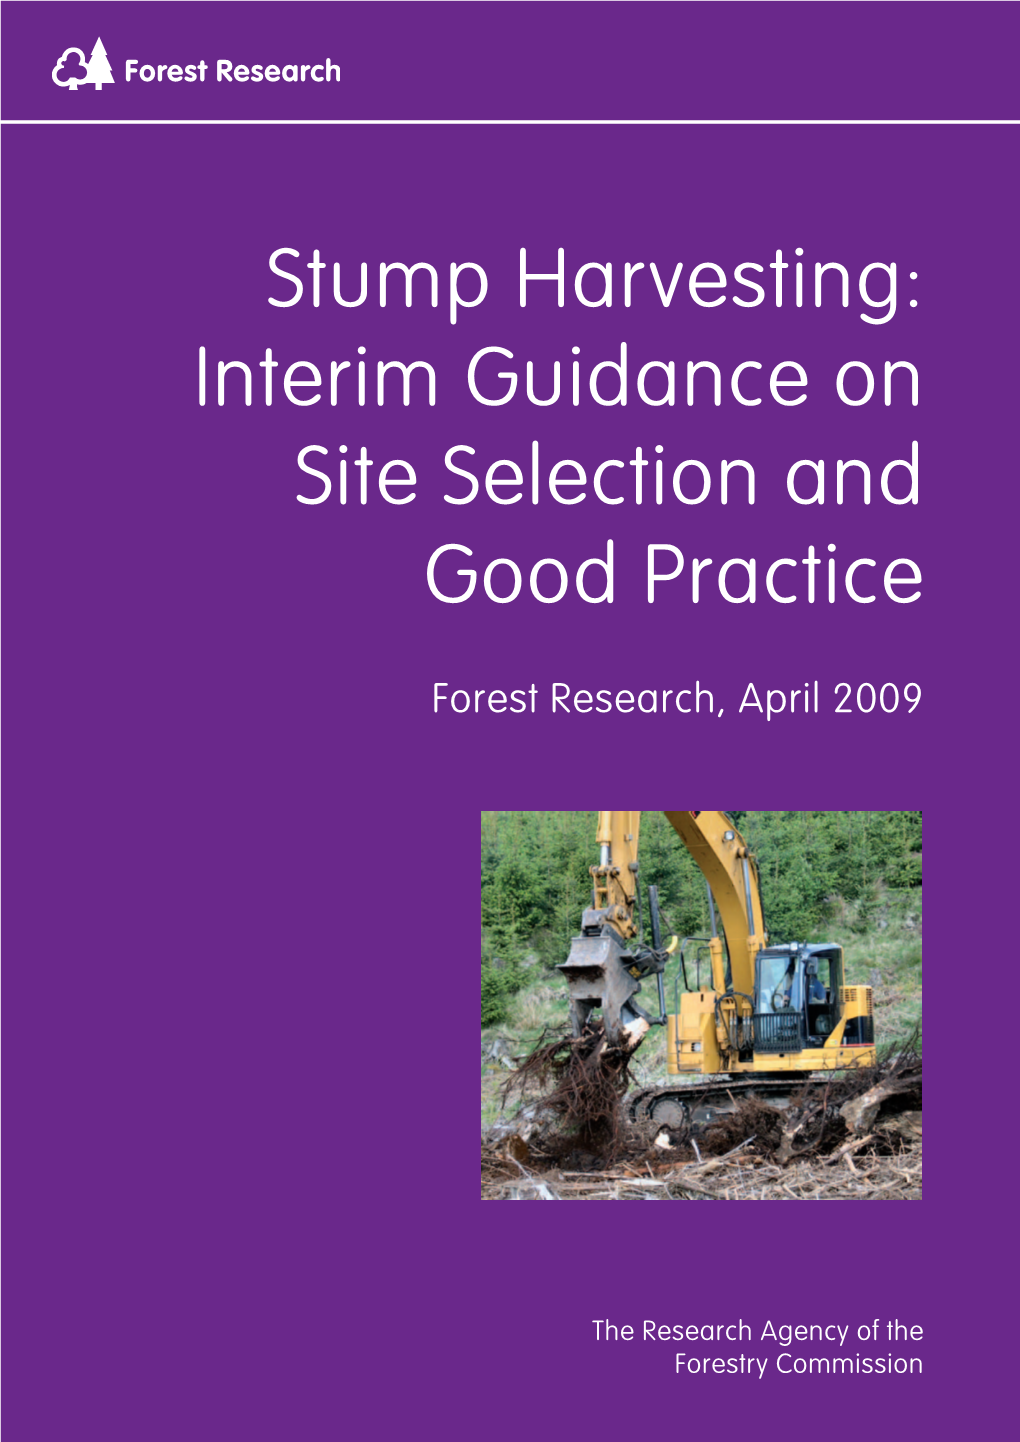 Stump Harvesting: Interim Guidance on Site Selection and Good Practice